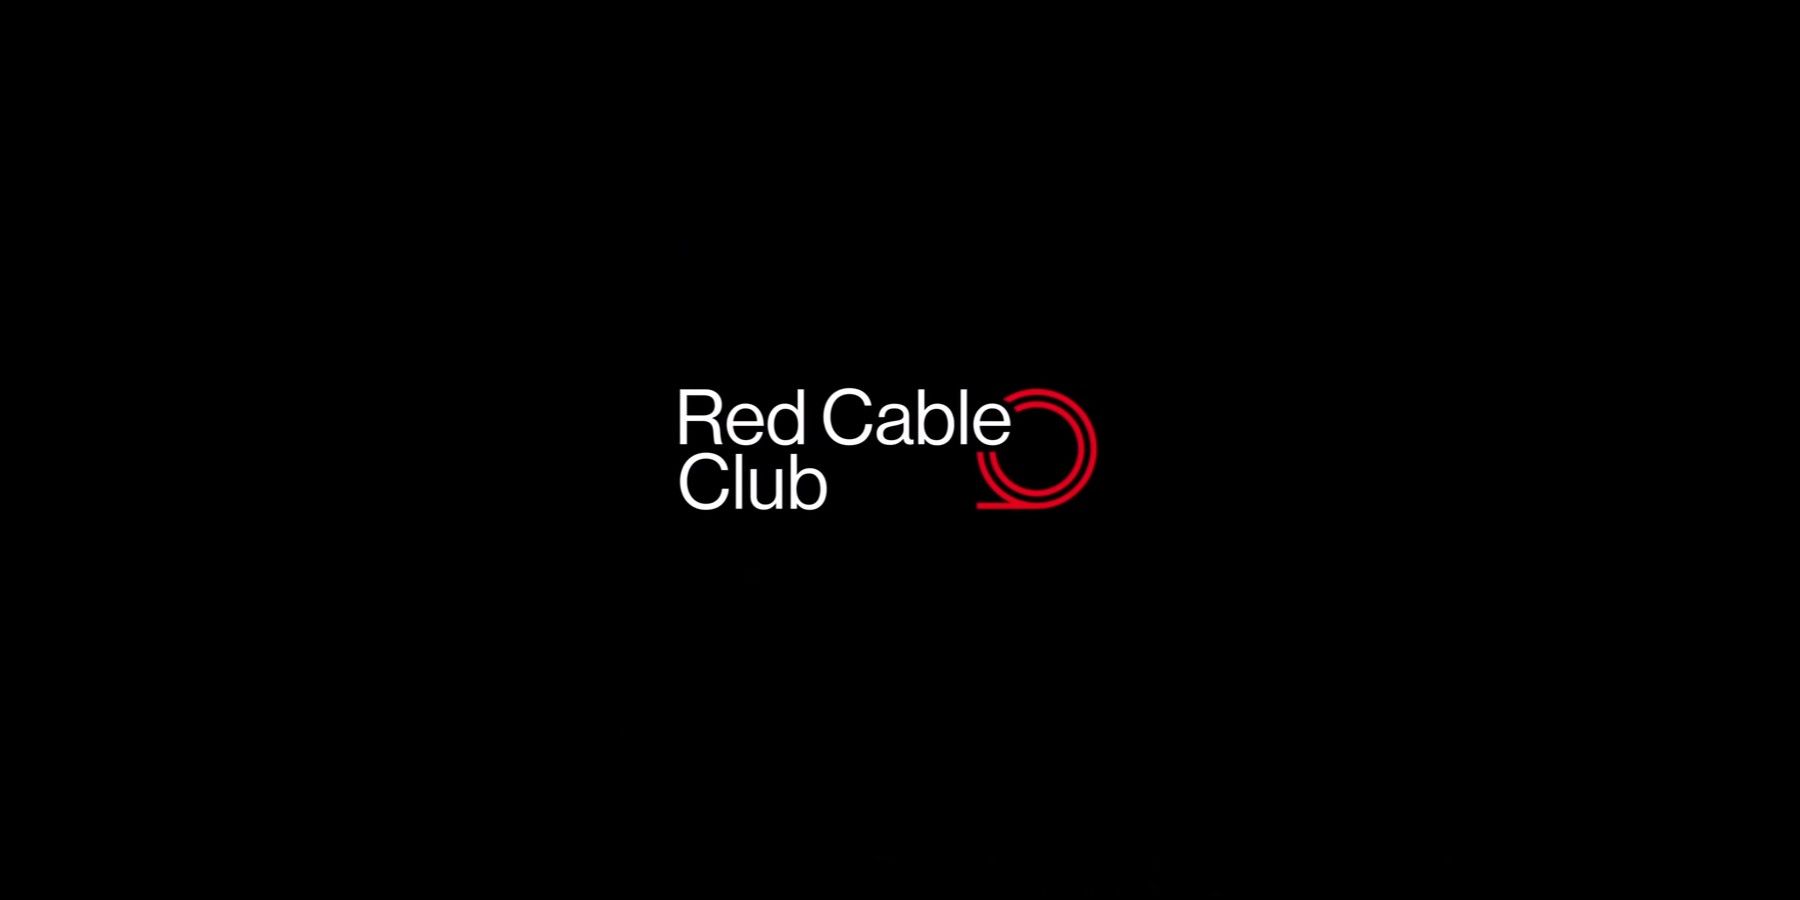 OnePlus Red Cable Club is open to those in the U.S. and Canada